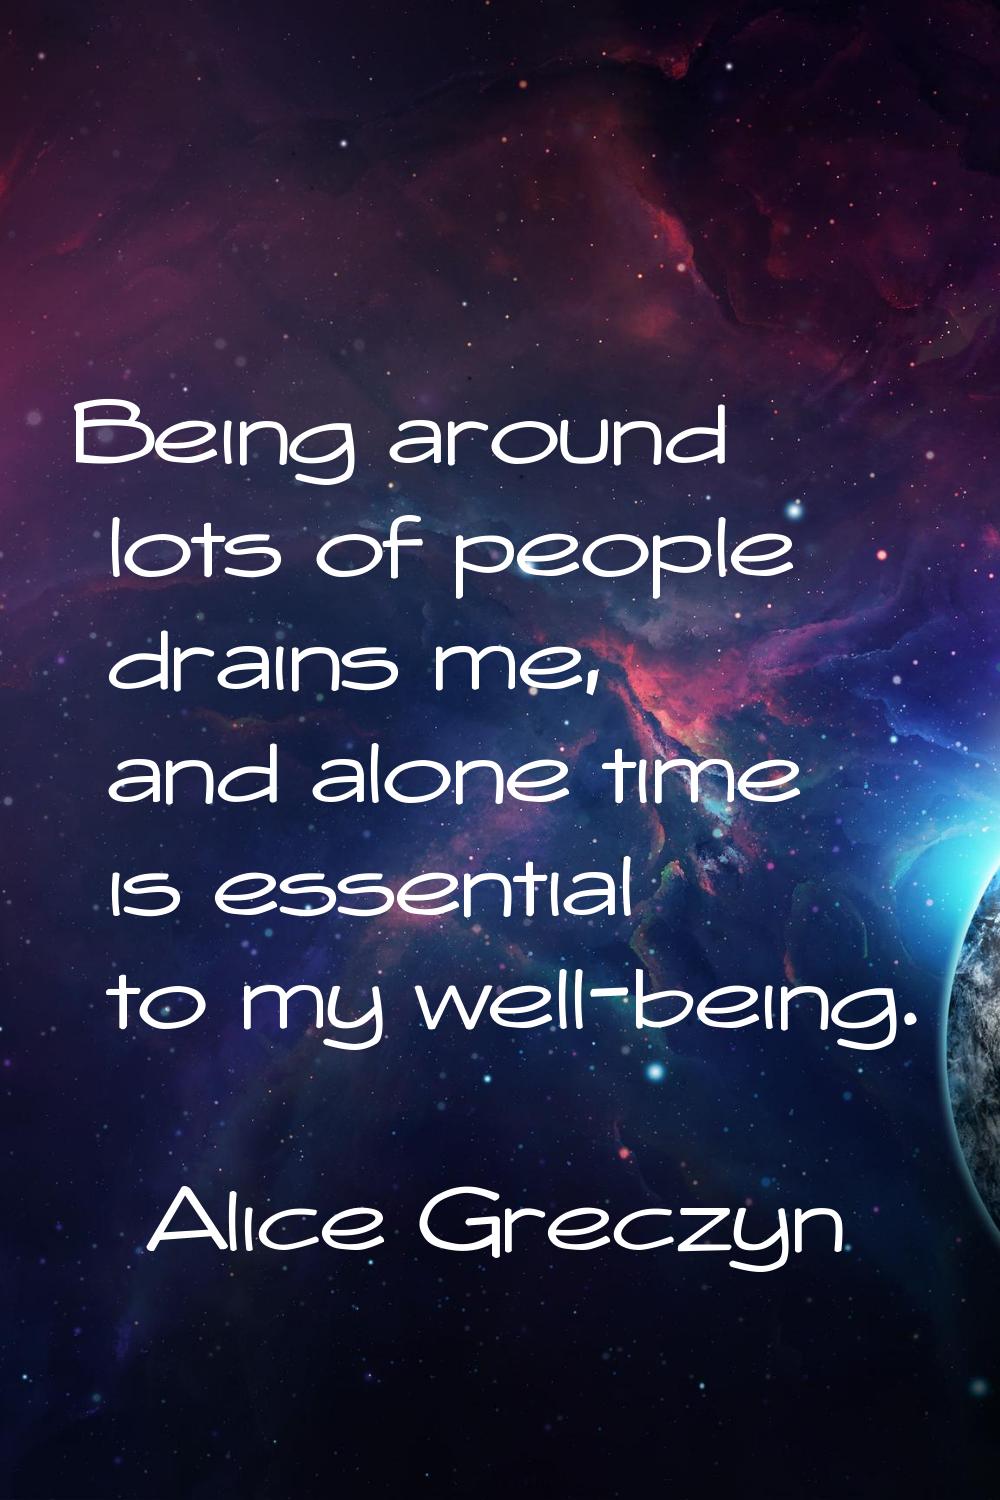 Being around lots of people drains me, and alone time is essential to my well-being.